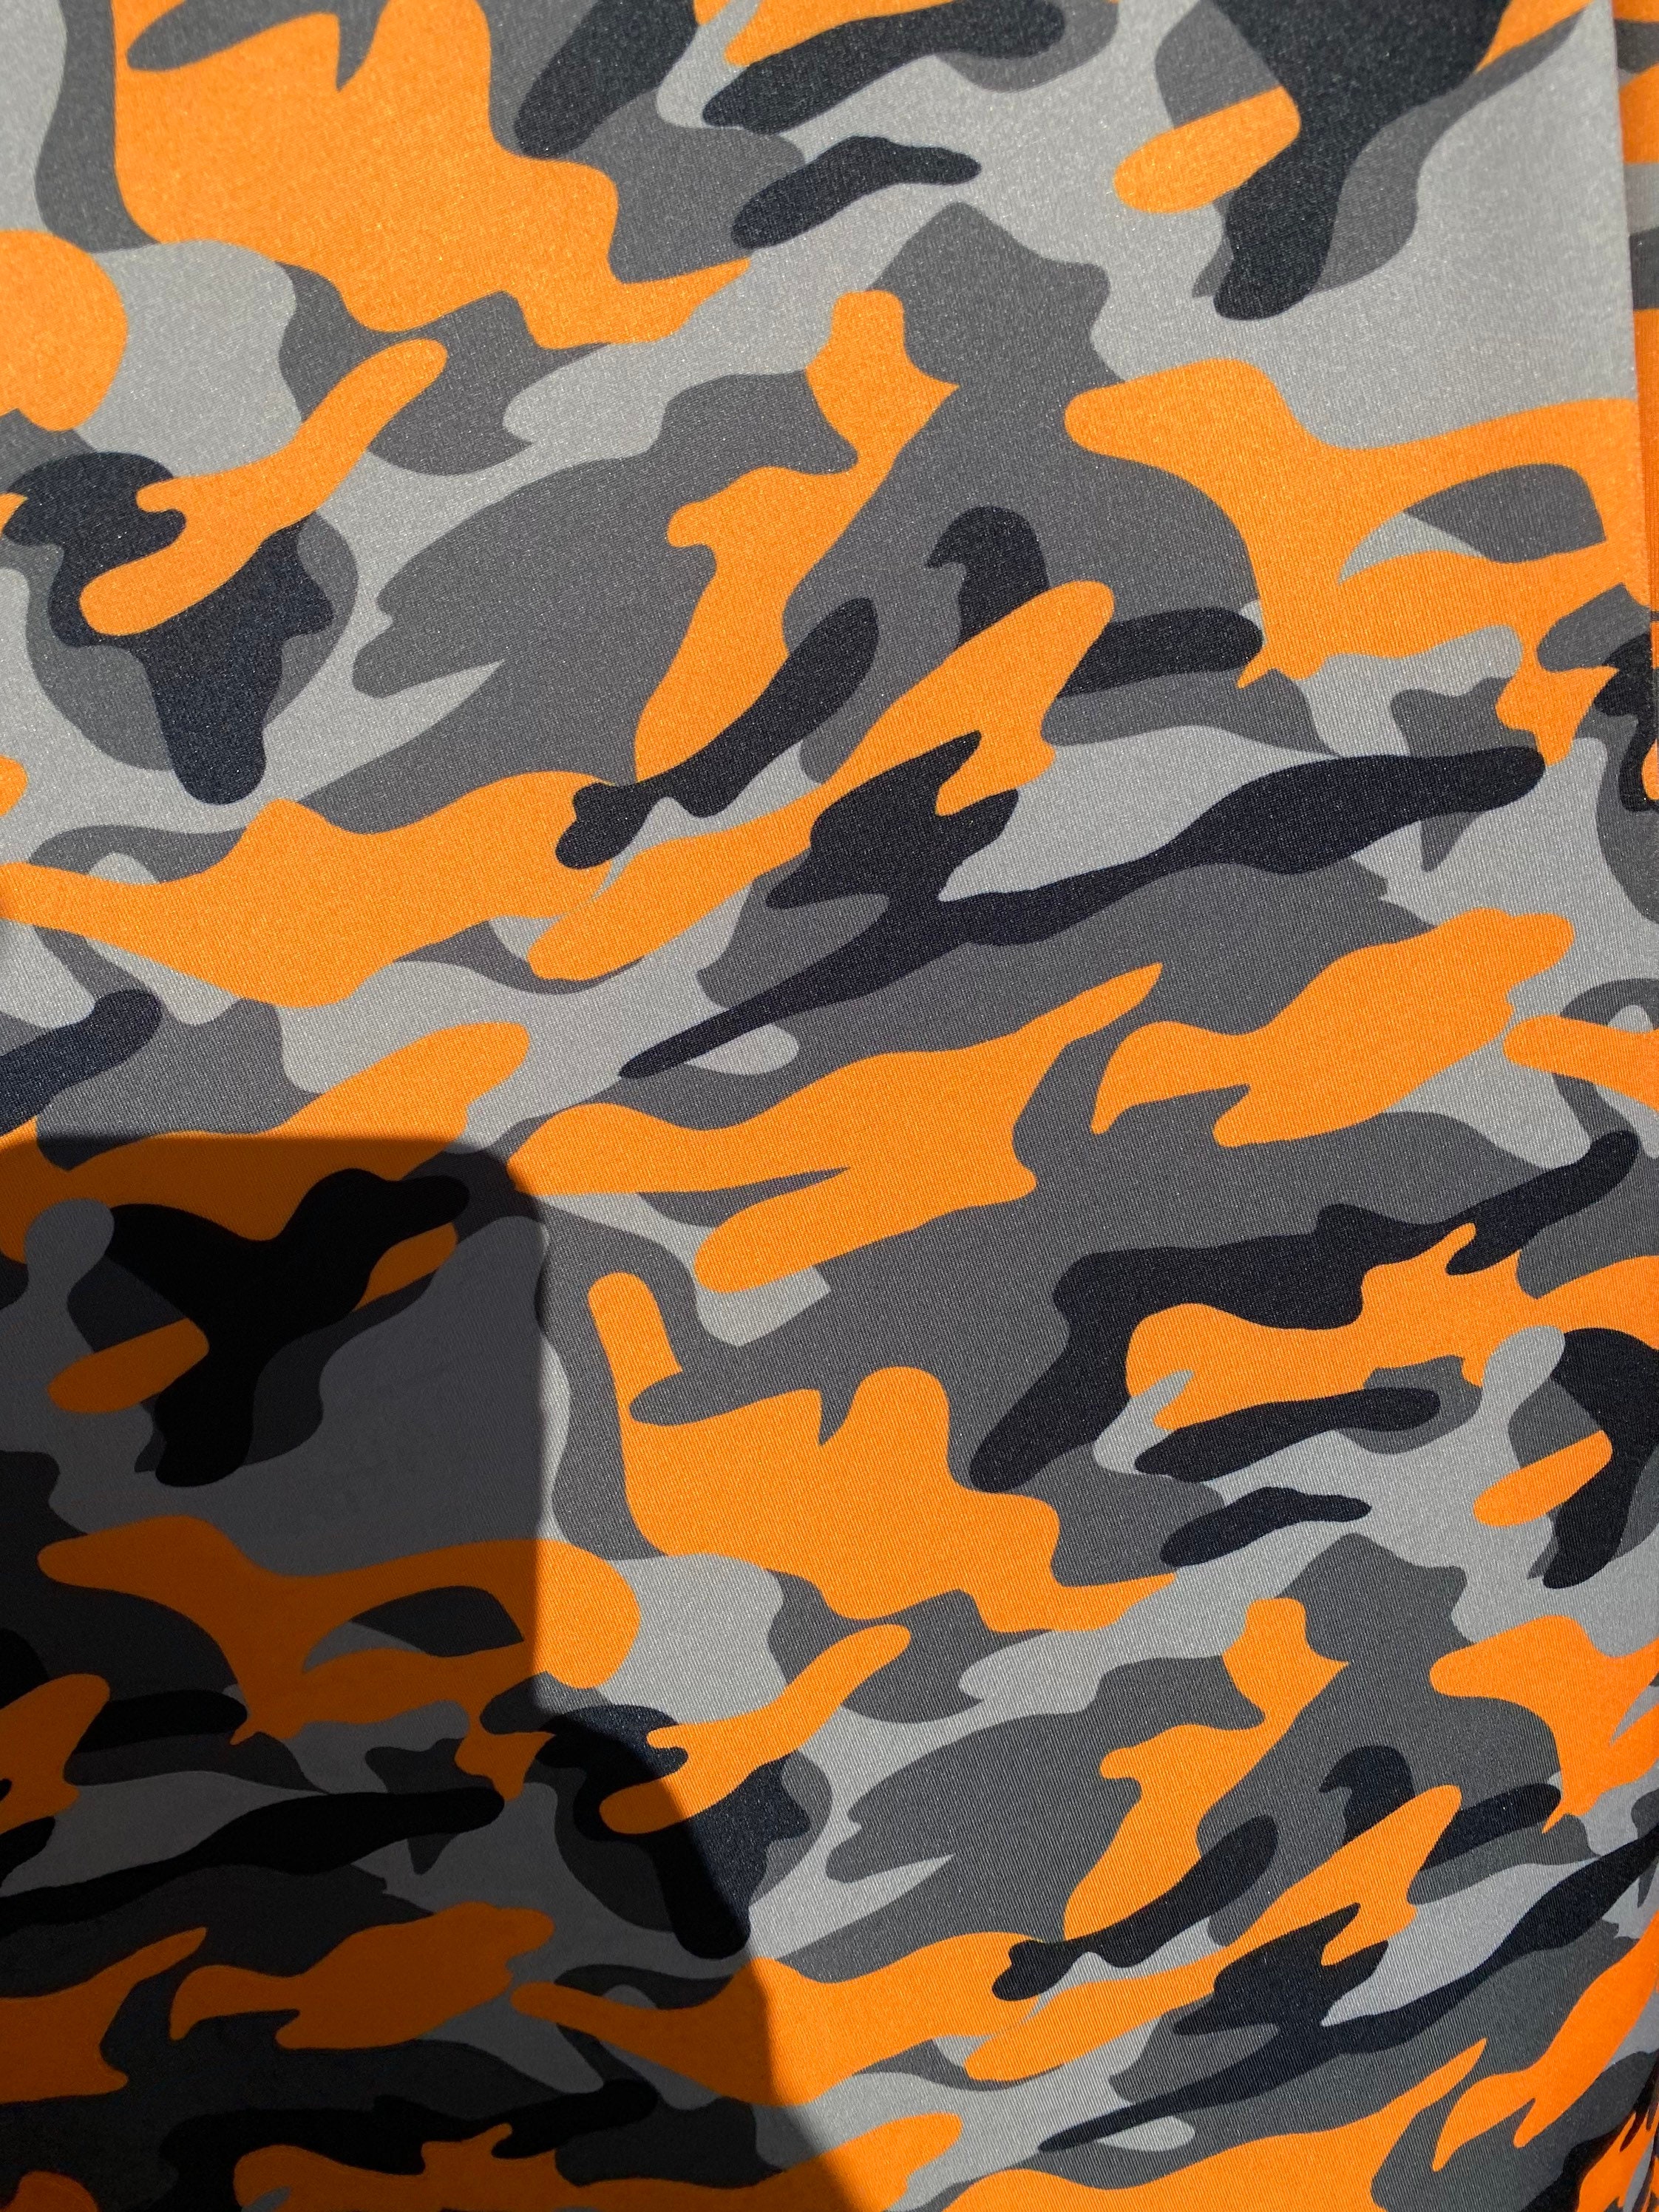 New Modern Camouflage Orange/black/gray Print on Great Quality of Nylon  Spandex 4-way Stretch 58/60 Sold by the YD. 